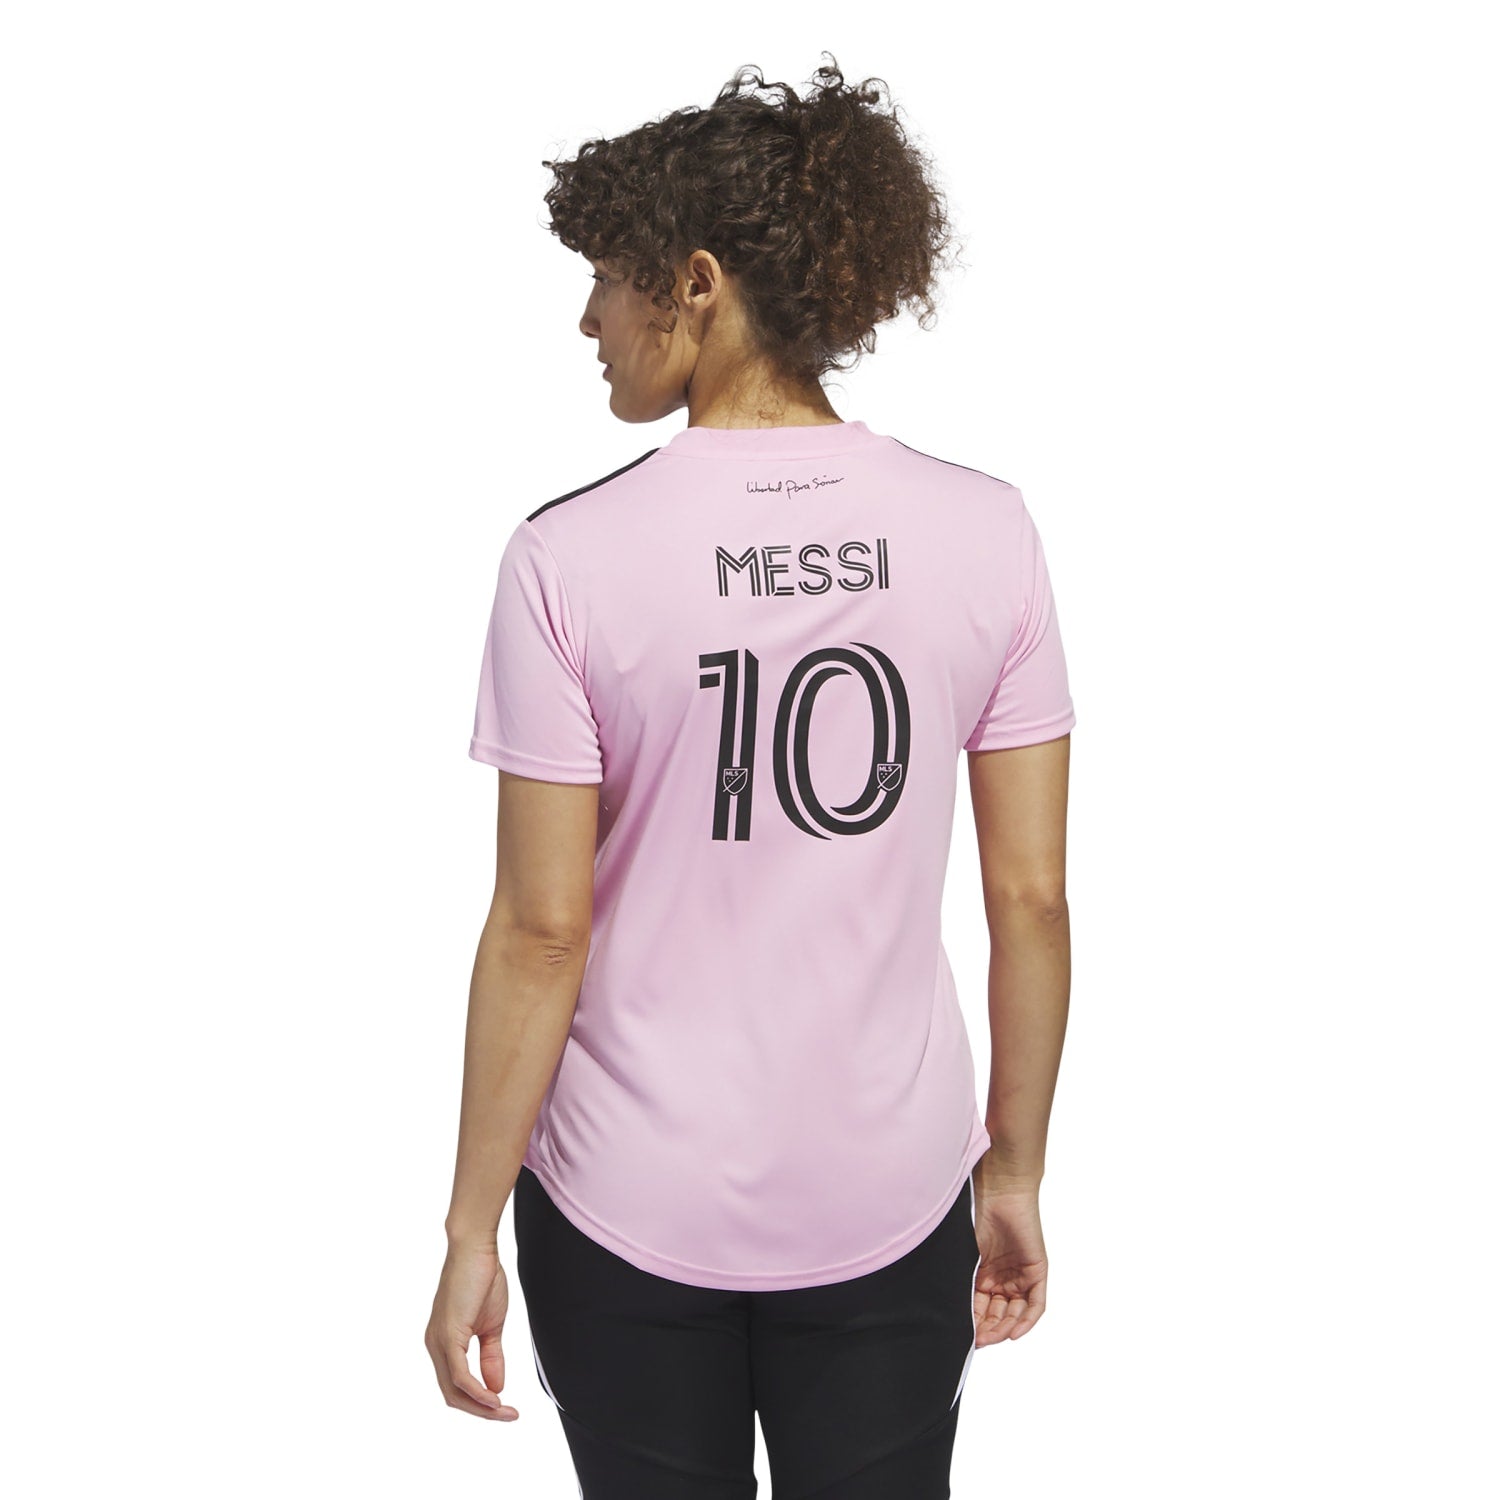 Adidas images Women Inter Miami CF Home Jersey Pink JE9703 - TOPS - Canada